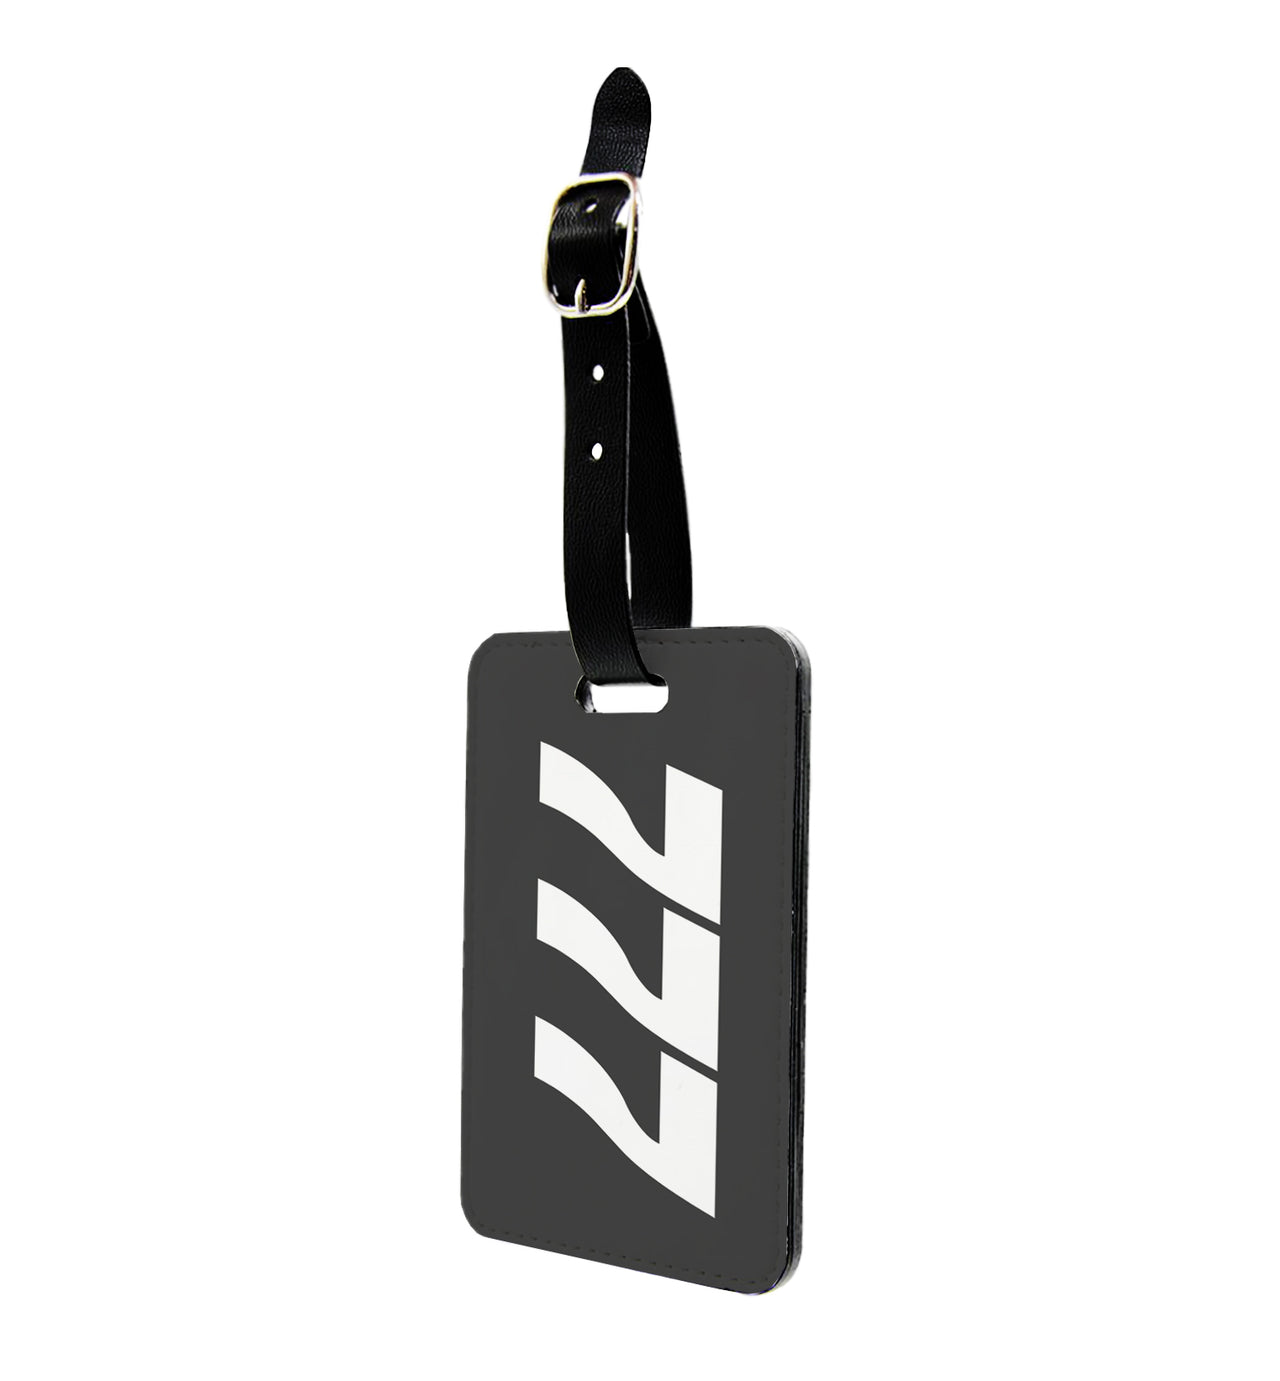 Boeing 777 Text Designed Luggage Tag